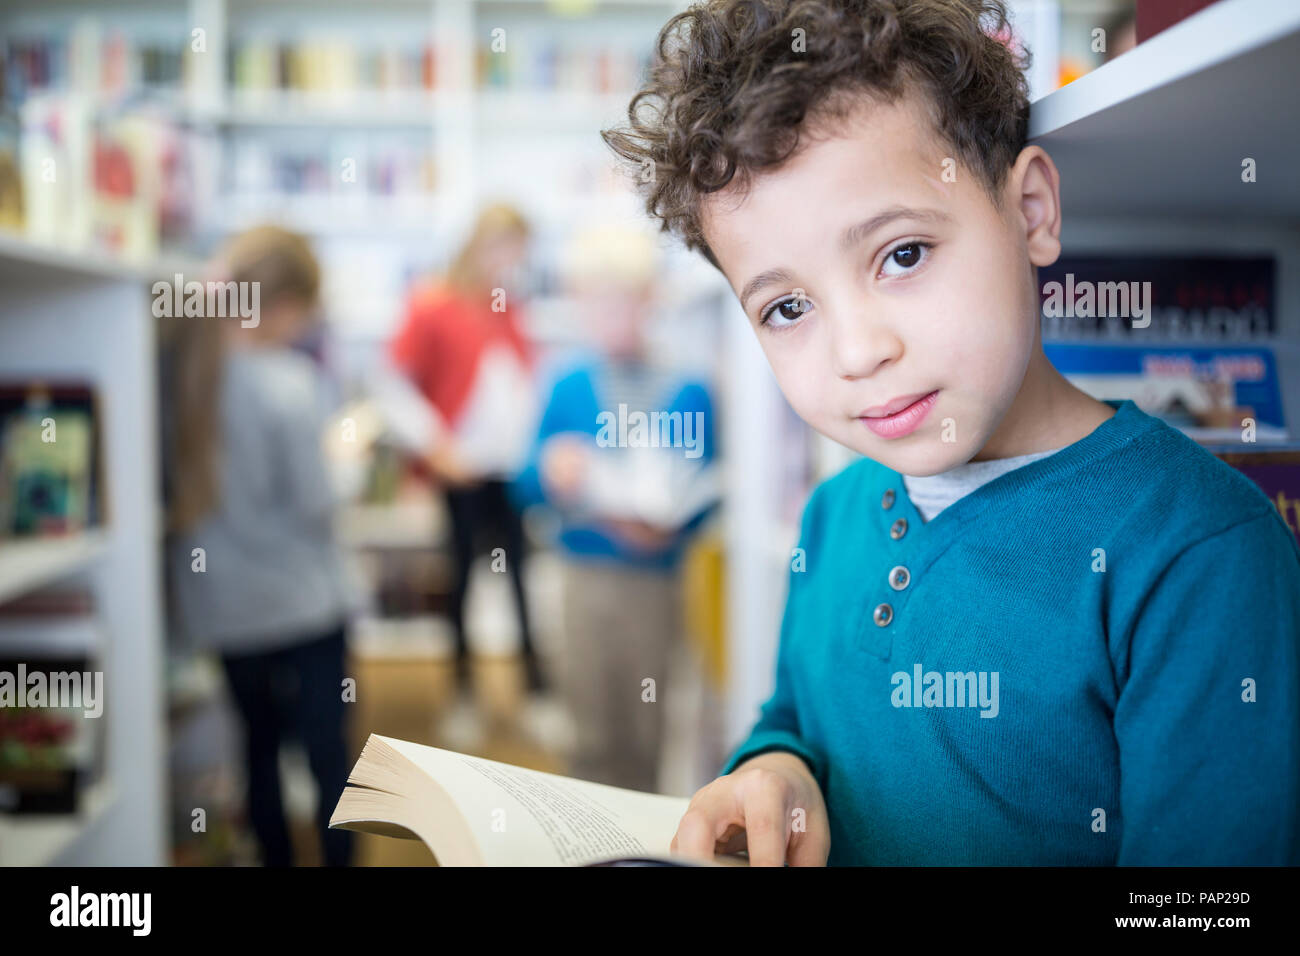 Portrait of smiling schoolboy with book in school library Stock Photo